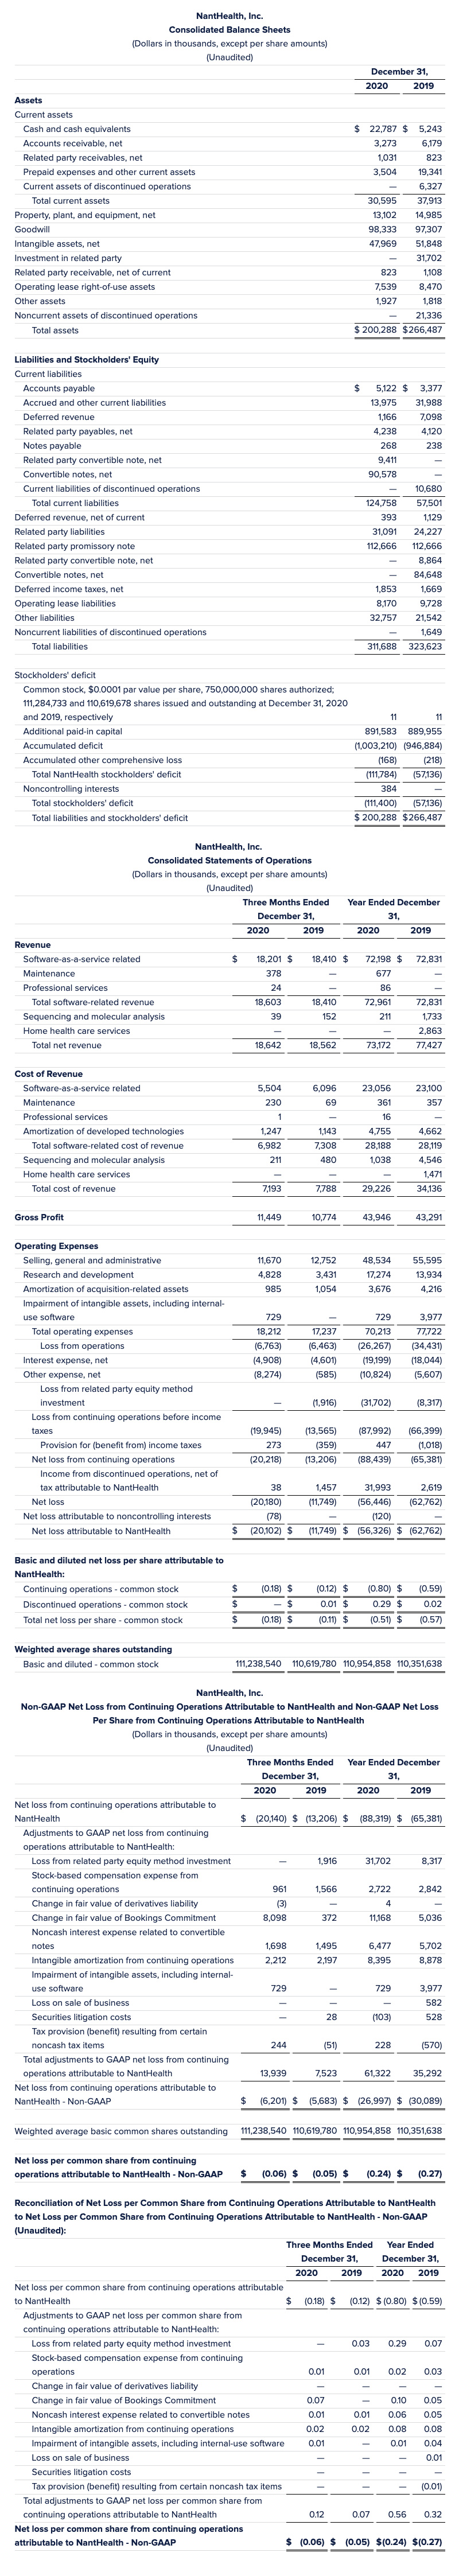 2020 Fourth Quarter and Full Year Financial Tables